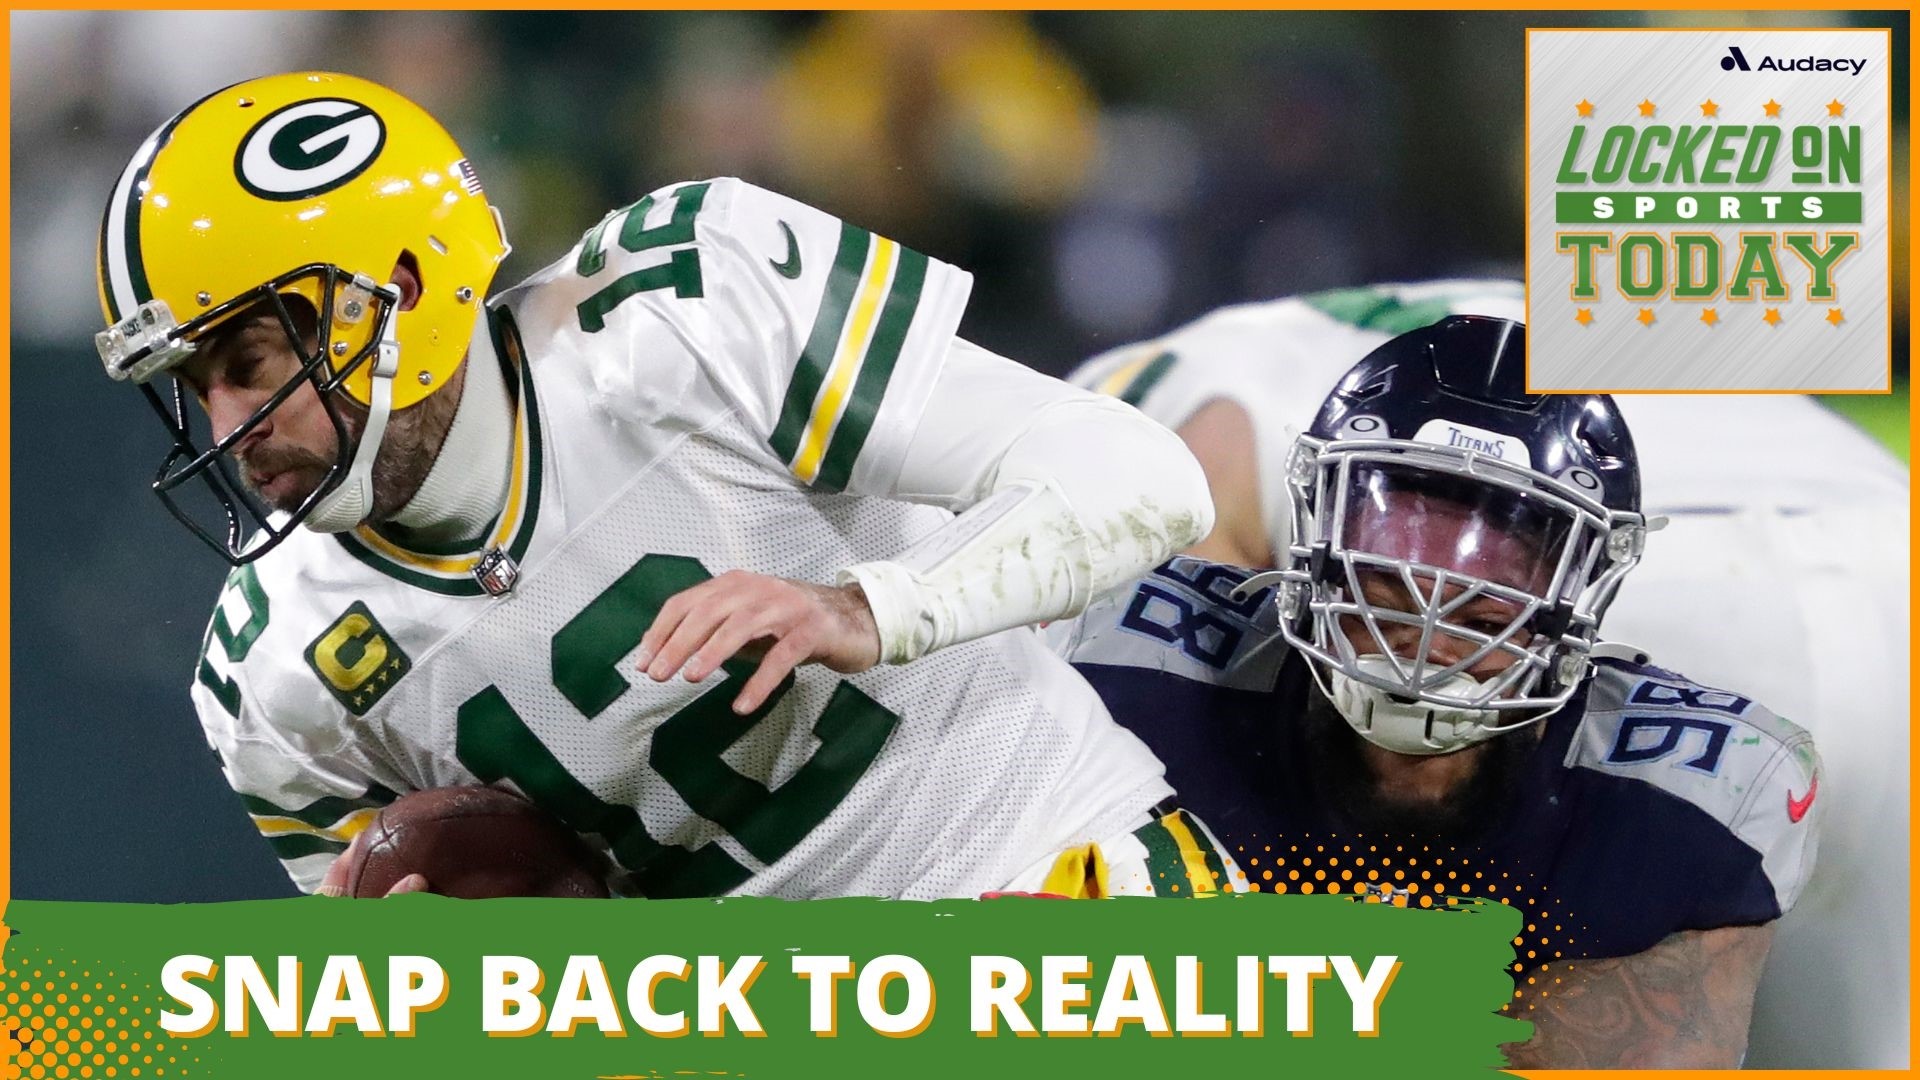 Discussing the day's top sports stories from the Packers being snapped back to reality with a loss to a preview of week 11 in the NFL.